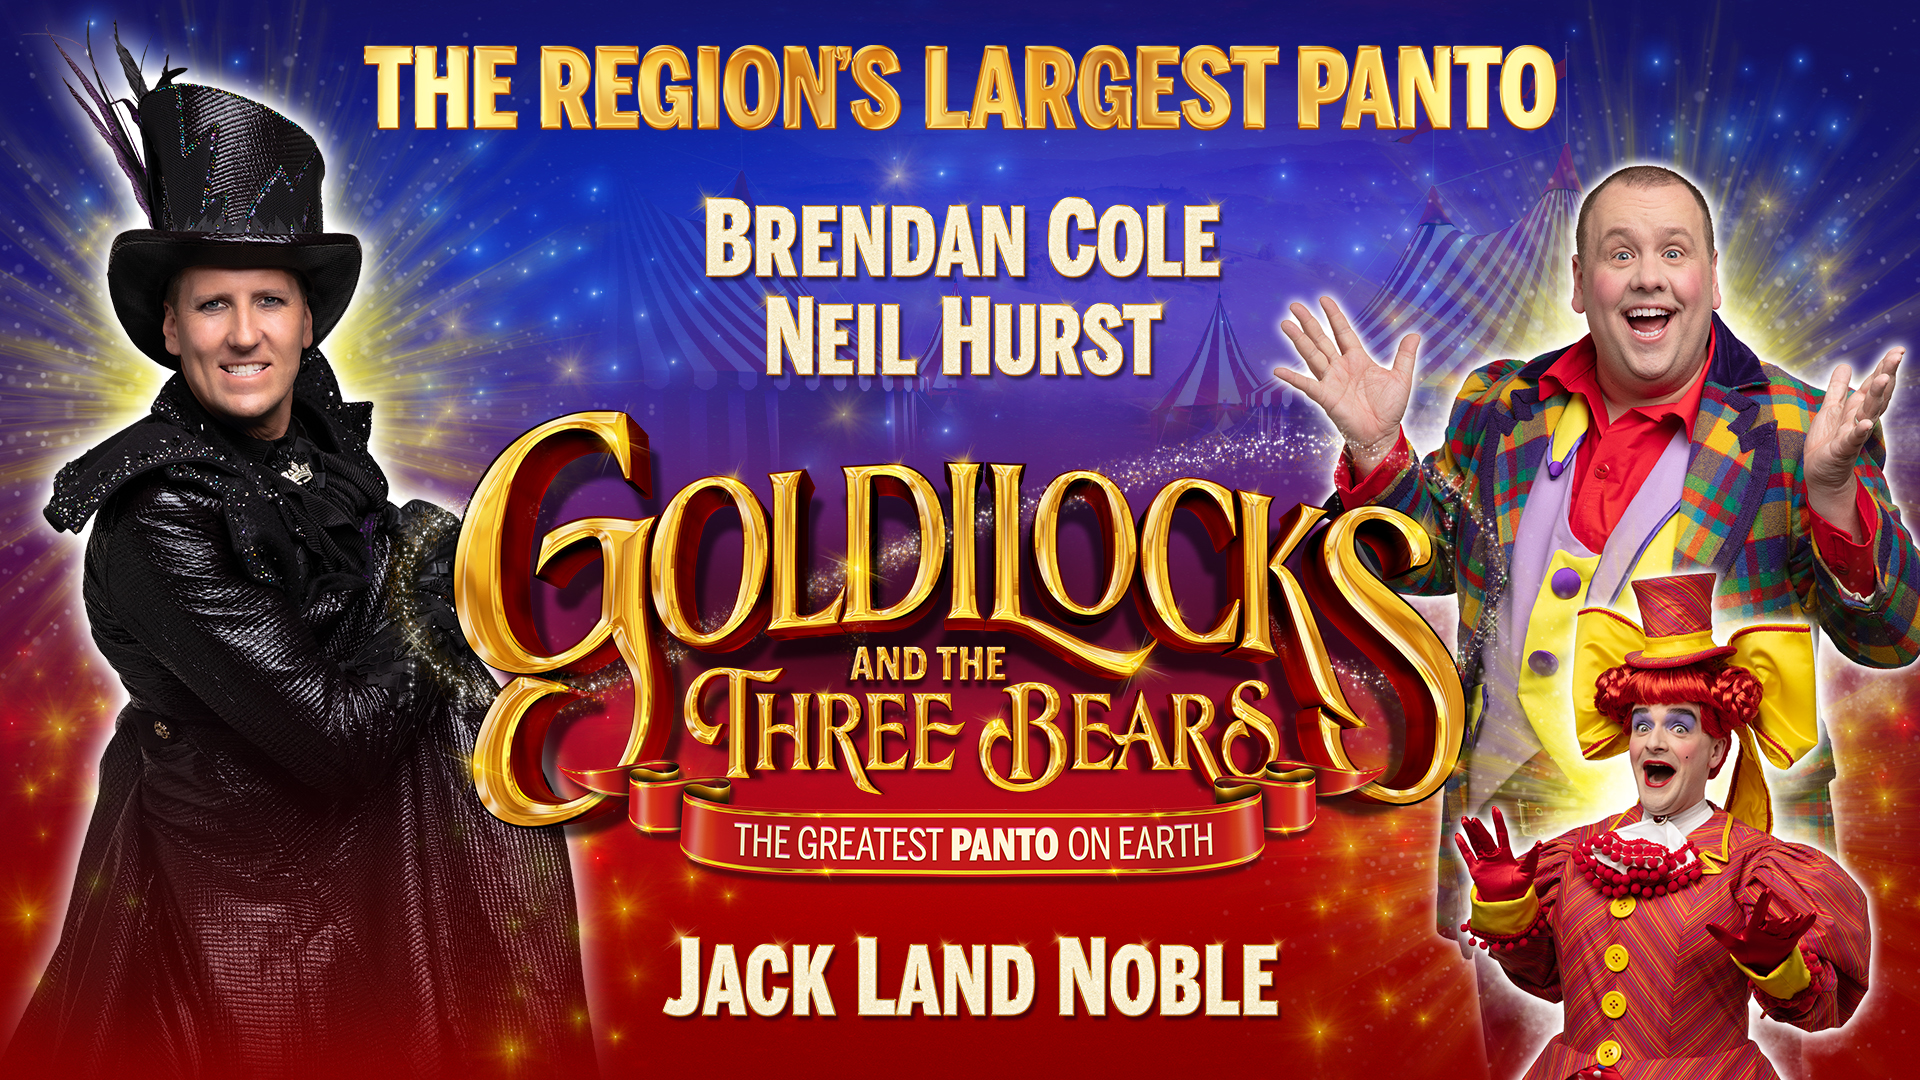 The words Goldilocks and the three bears in the centre in gold against a blue background with red and white tents behind